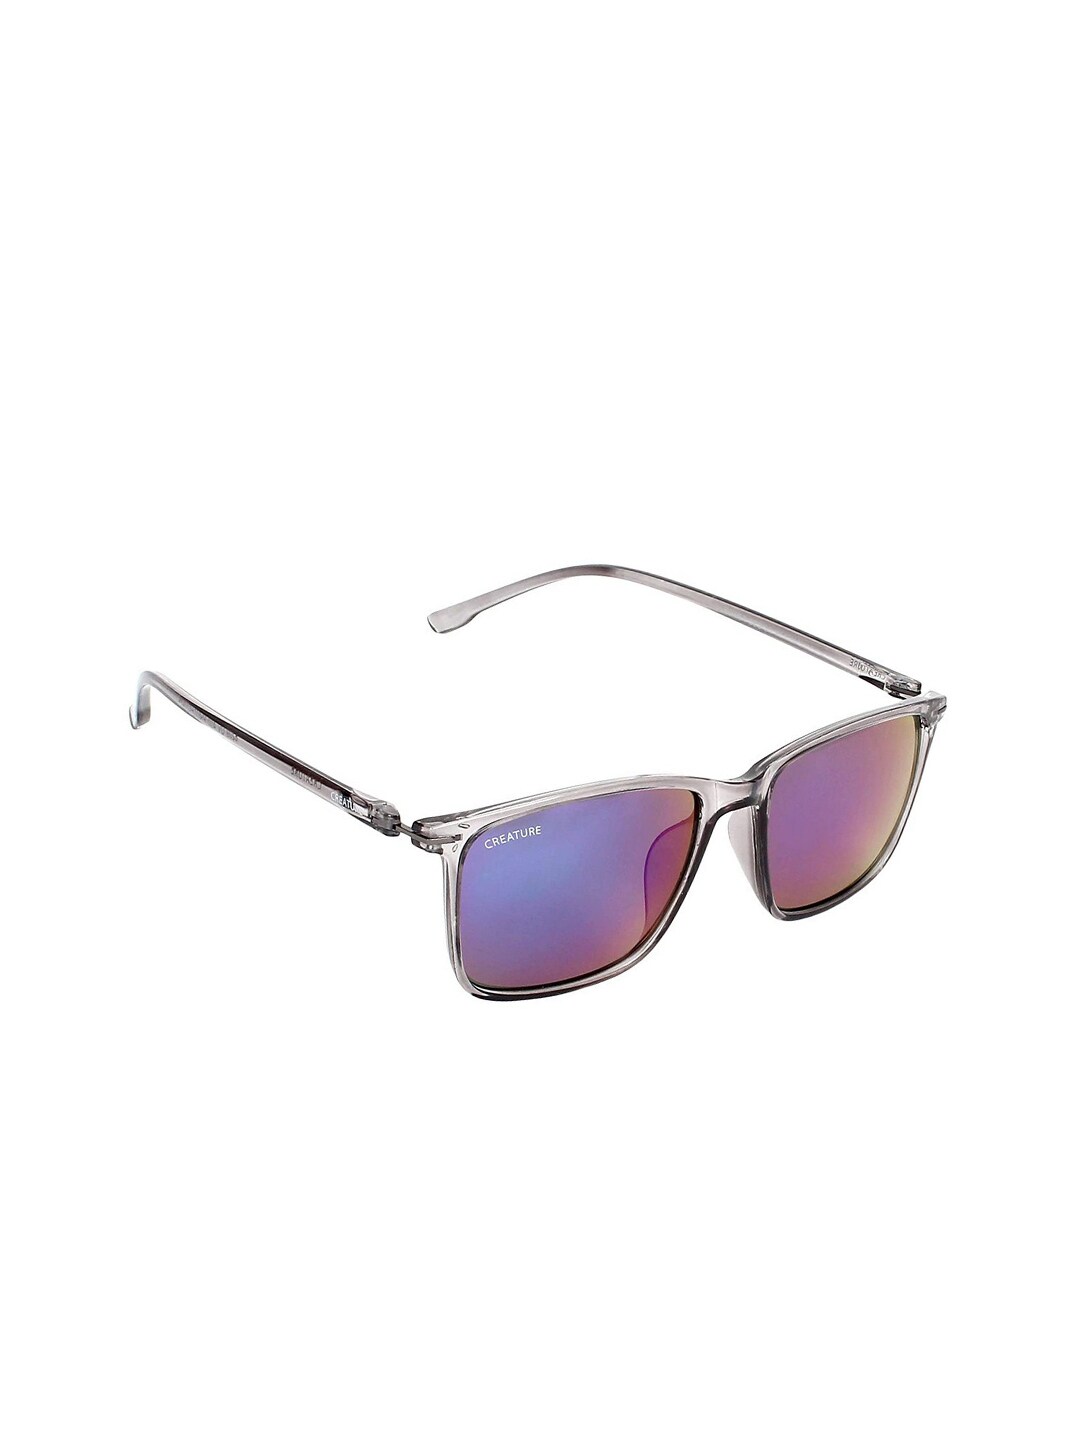 Creature Unisex Blue Lens Wayfarer Sunglass with UV Protected Lens - PWRS-007 Price in India